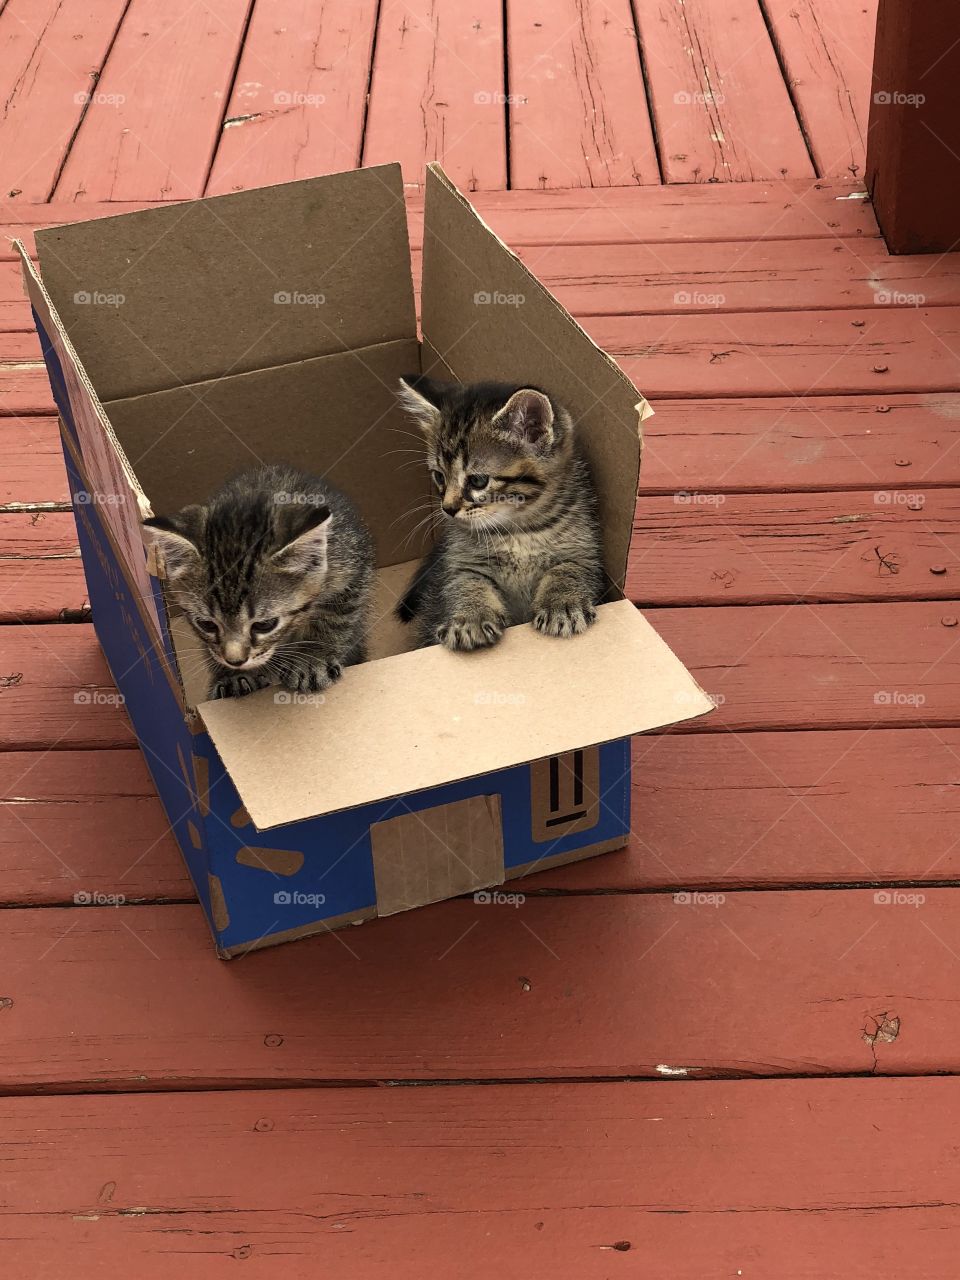 Prime unboxing with kittens